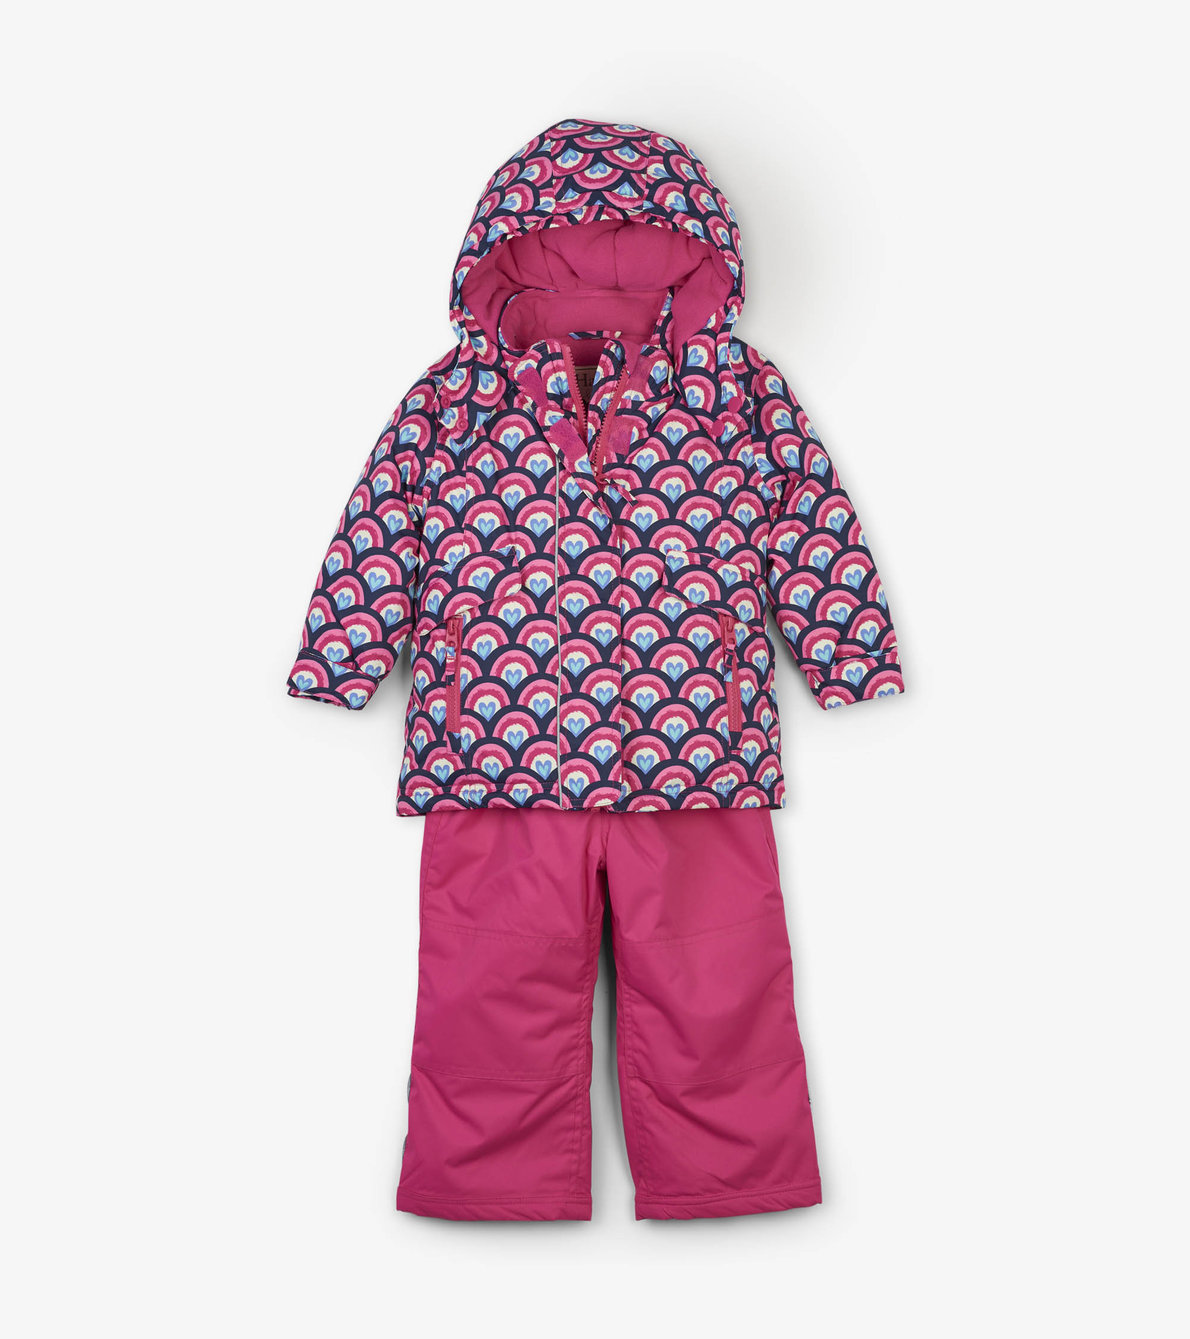 View larger image of Lovely Rainbows Baby Snowsuit Set